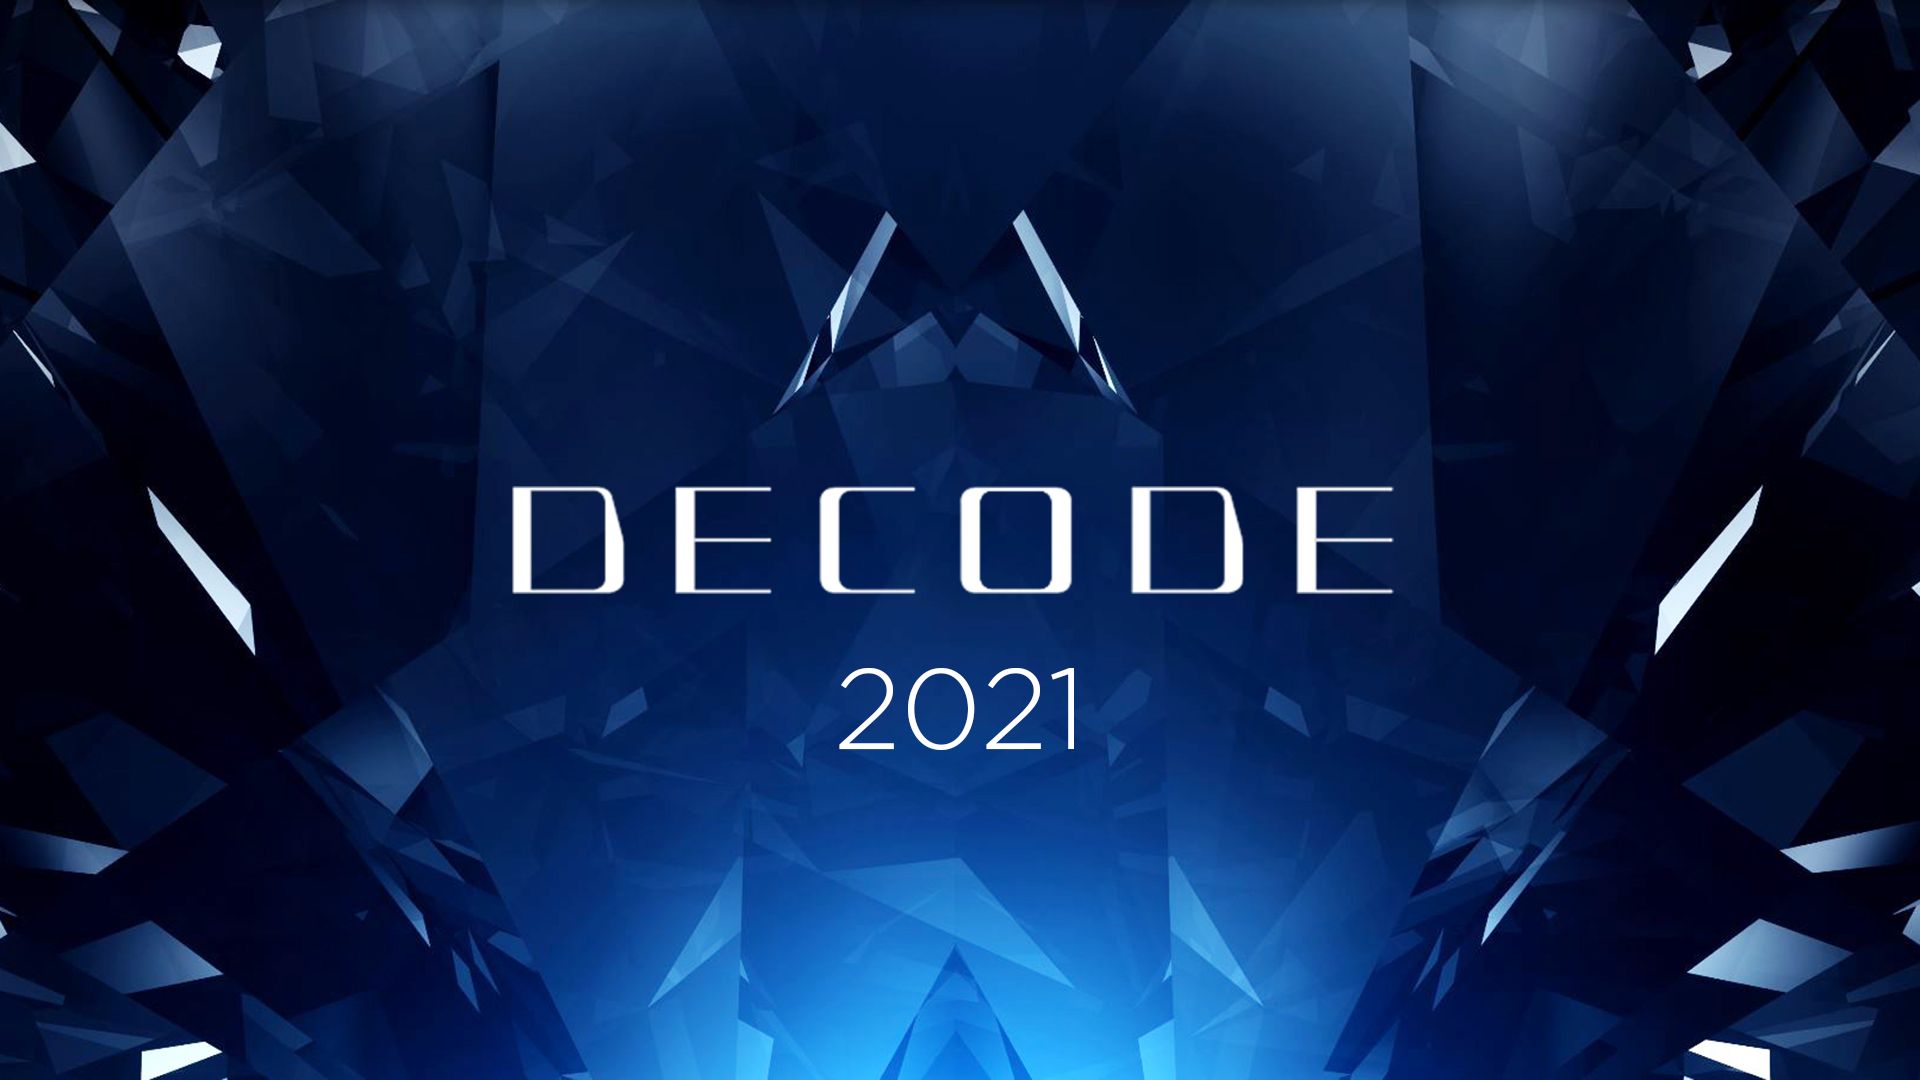 The DECODE Award is back!